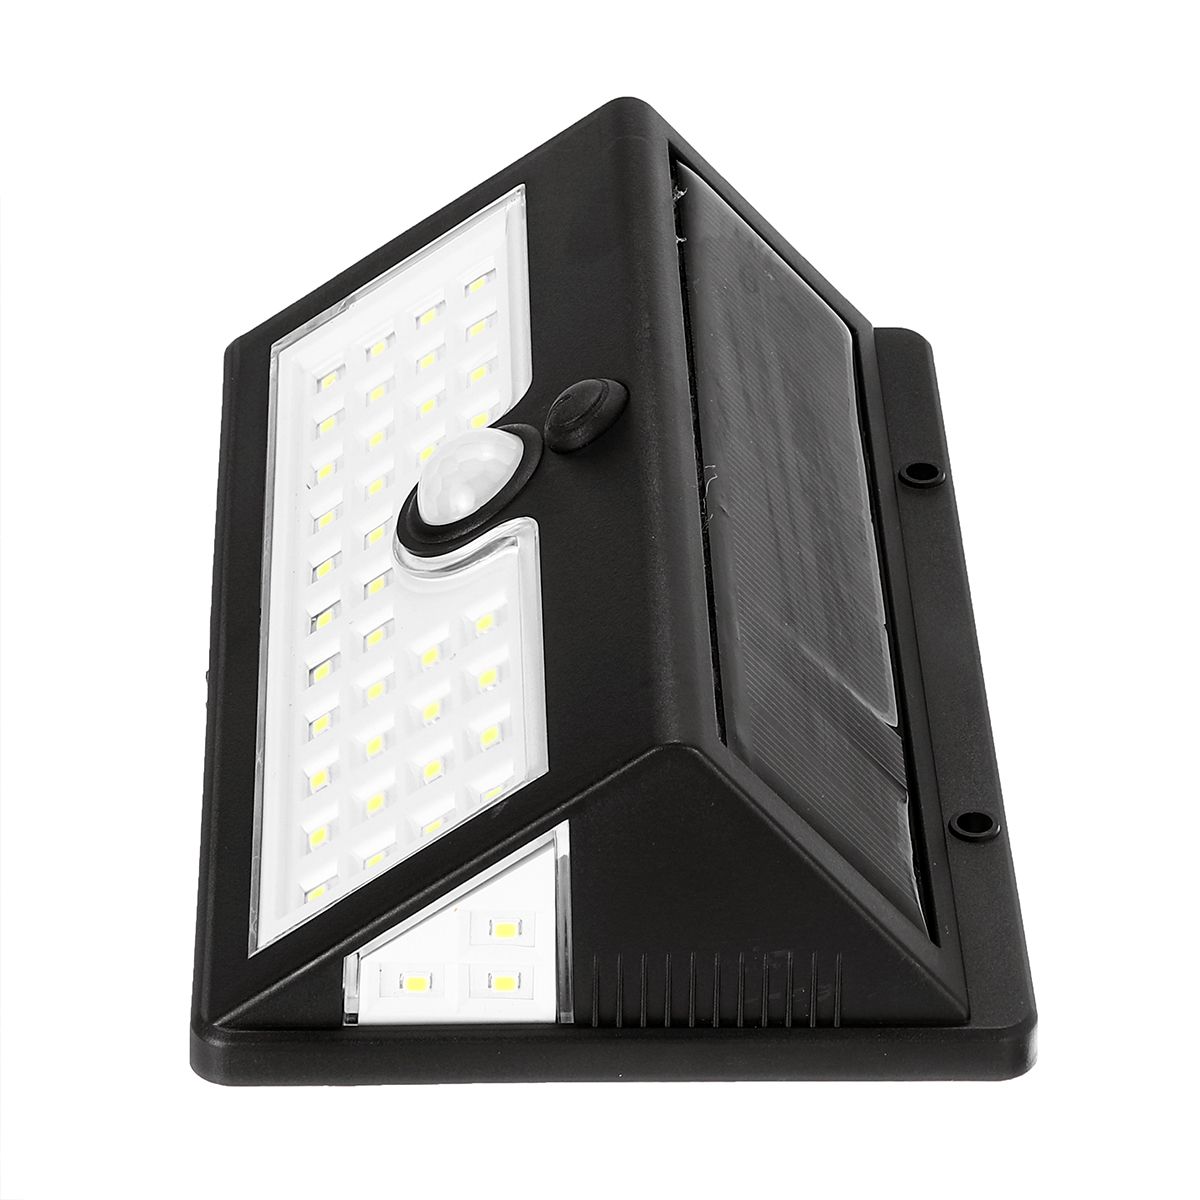 44-LED-Solar-Power-Wall-Light-Security-Outdoor-Garden-Motion-Activated-Yard-Lamp-1532641